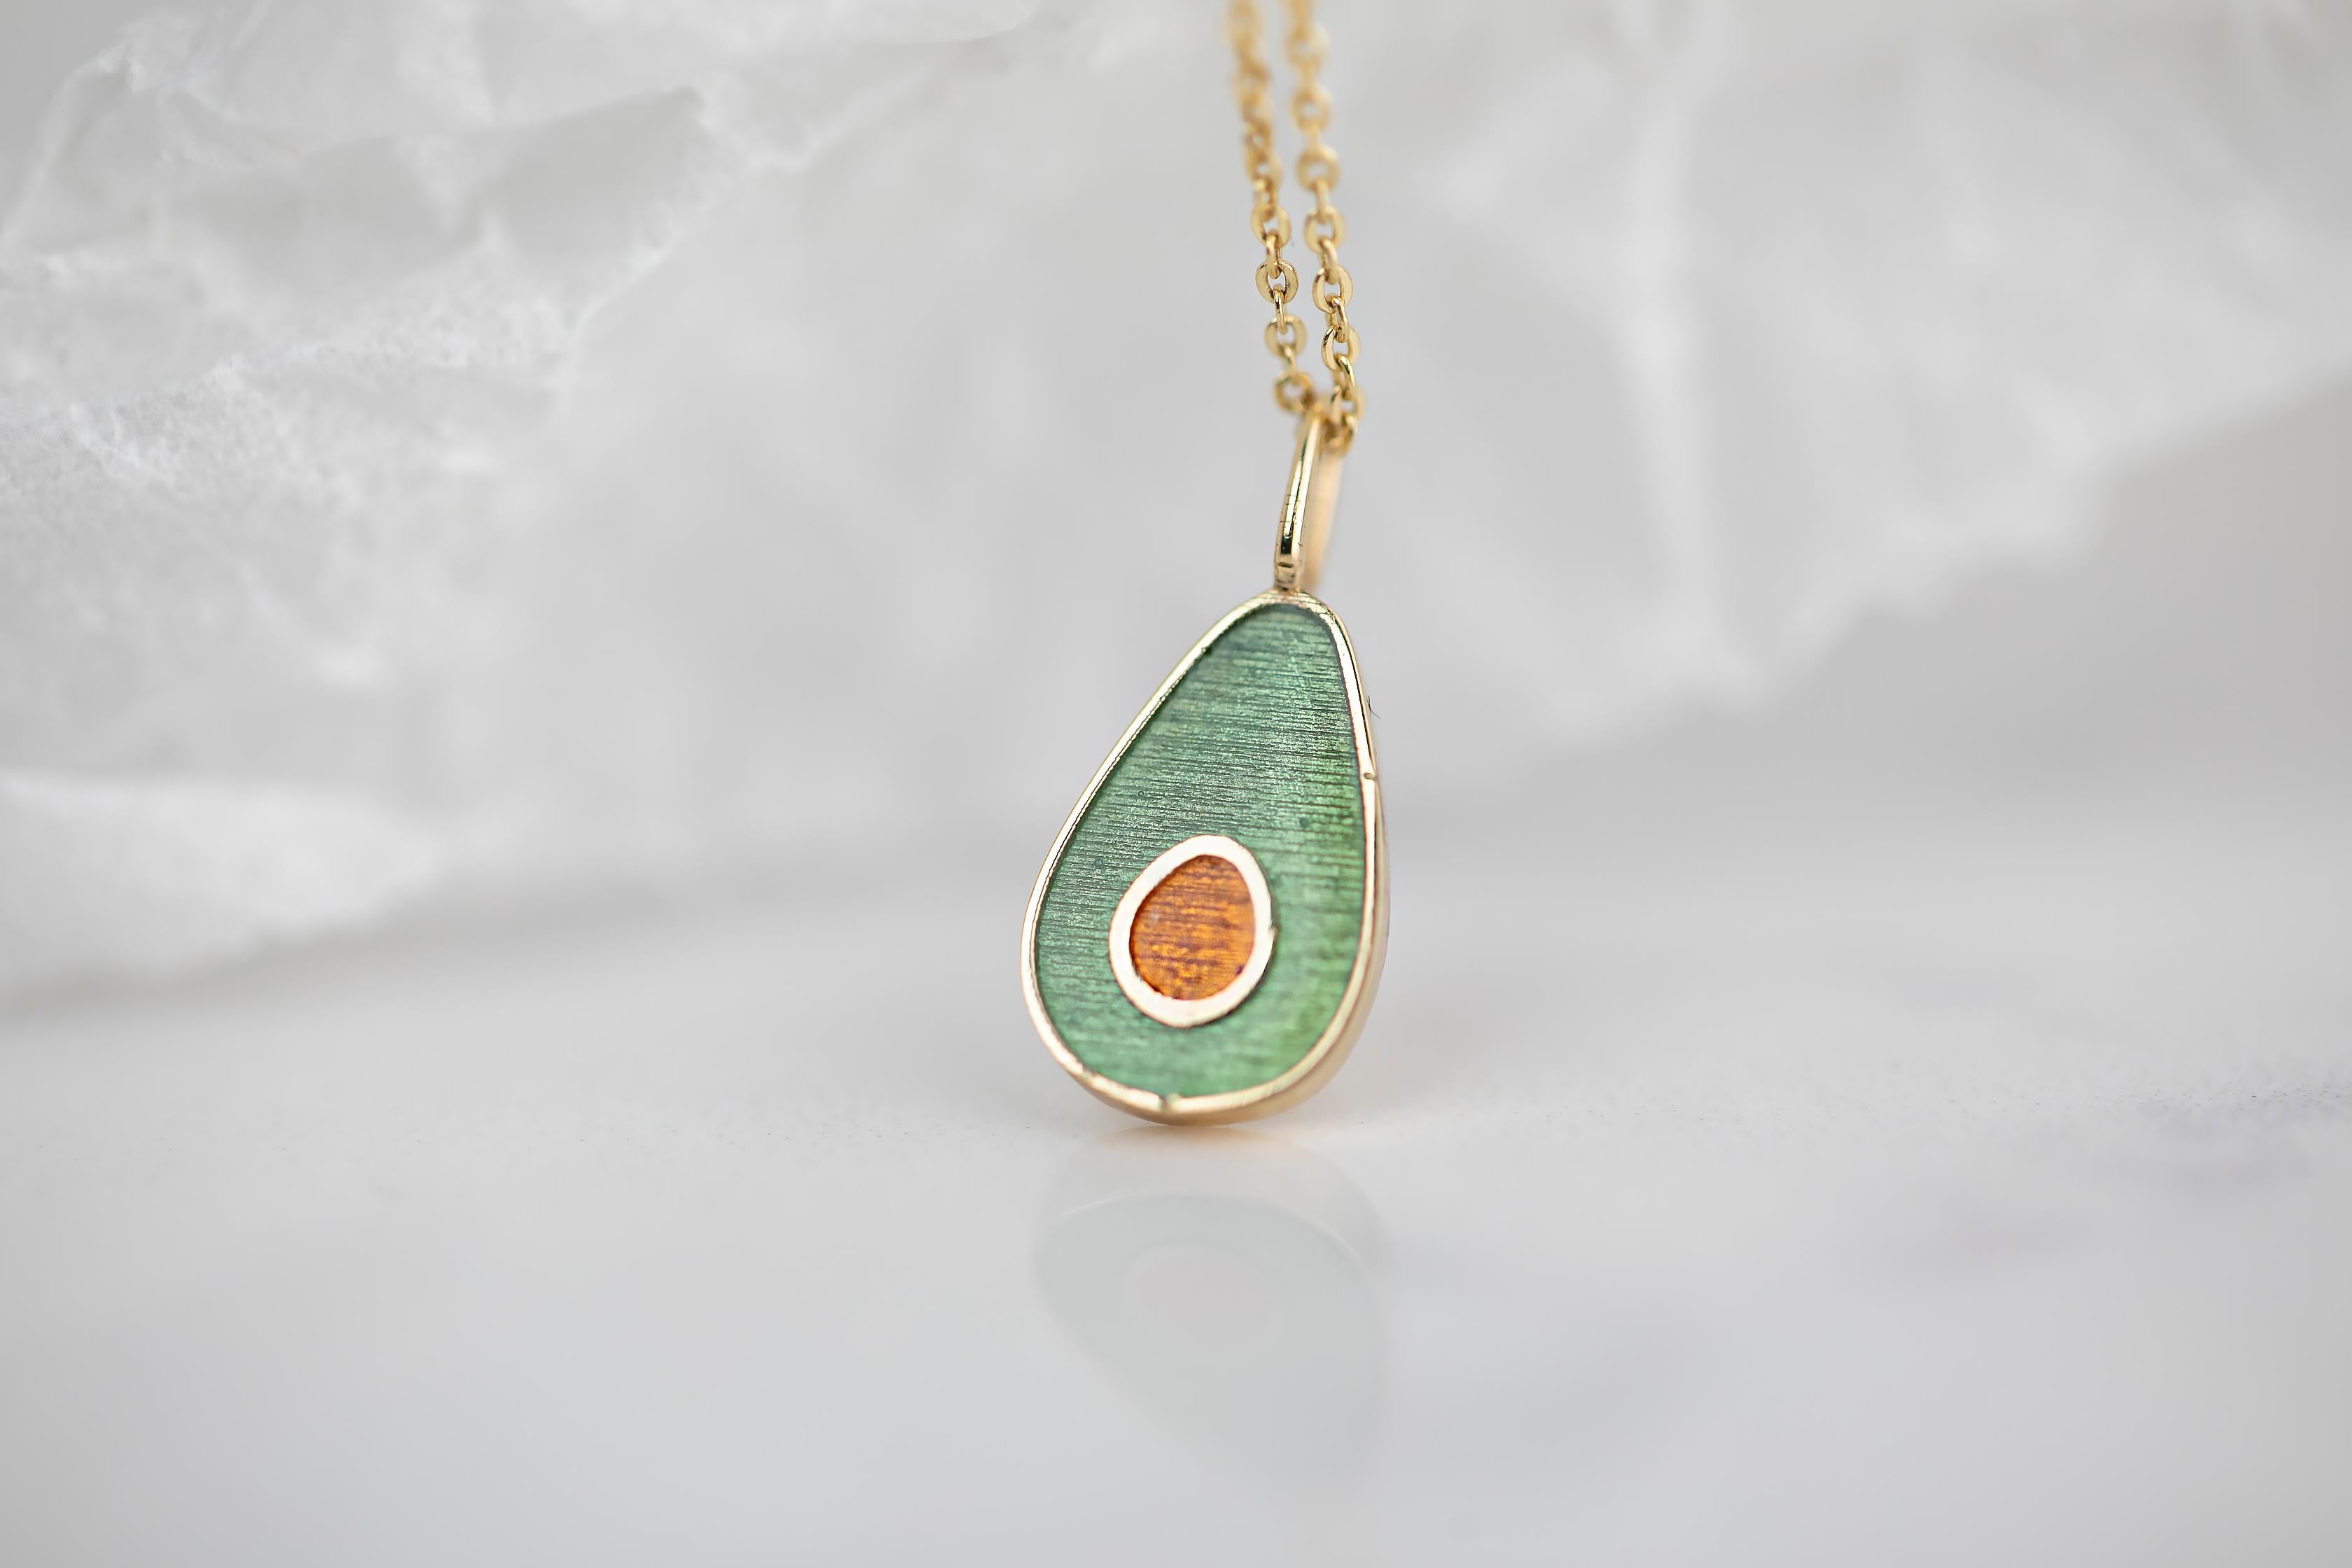 14K Gold Avocado Necklace - Enamel Fruit Necklace

Special desing necklace with enamel. It’s a manual labour product. ‘Handmade’. Fashionable product. 

This necklace was made with quality materials and excellent handwork. I guarantee  the quality